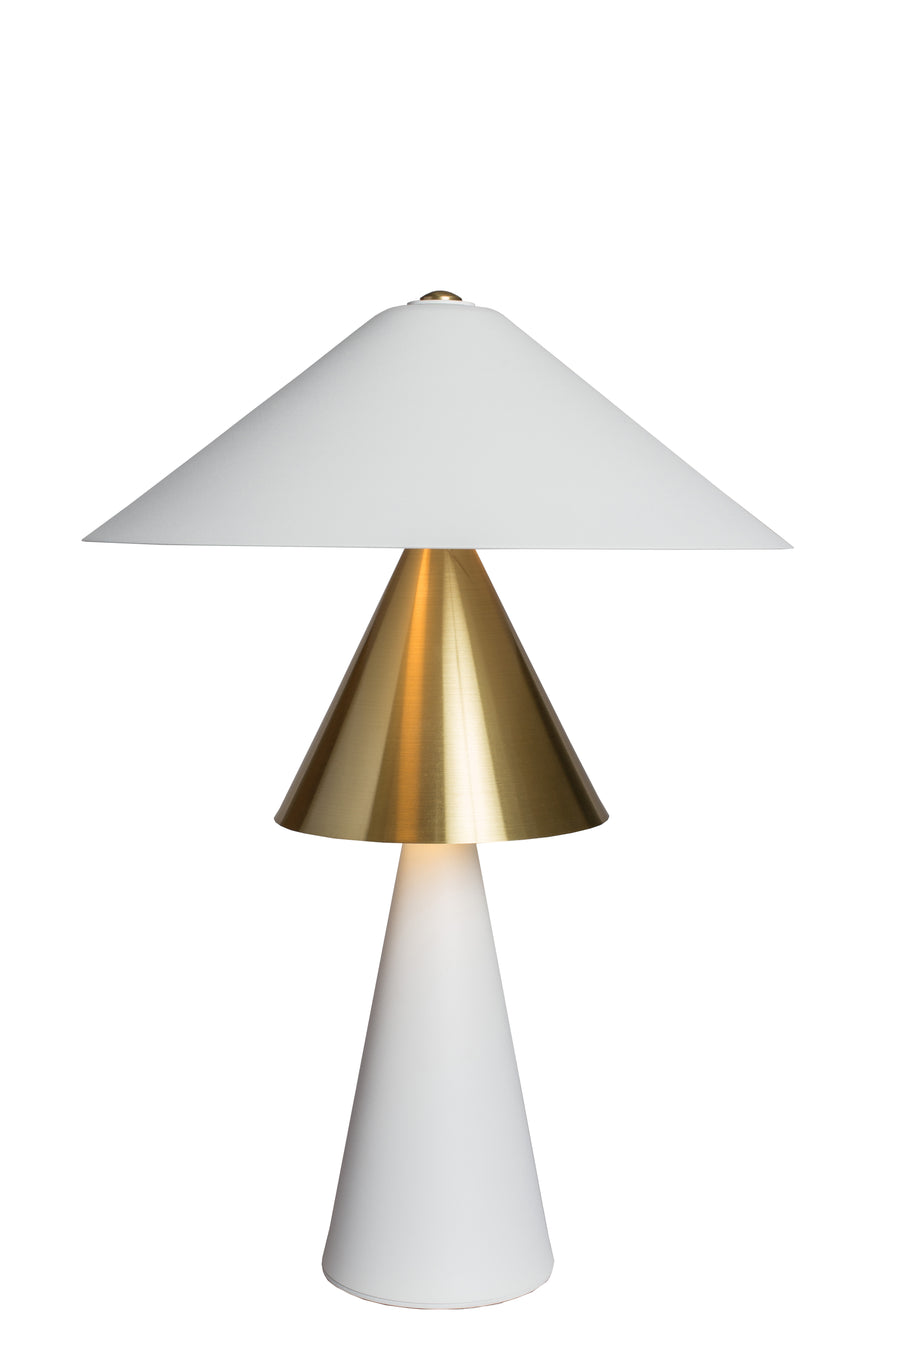 SHANGHAI brushed copper matte lampshade + base and shade white microtexture